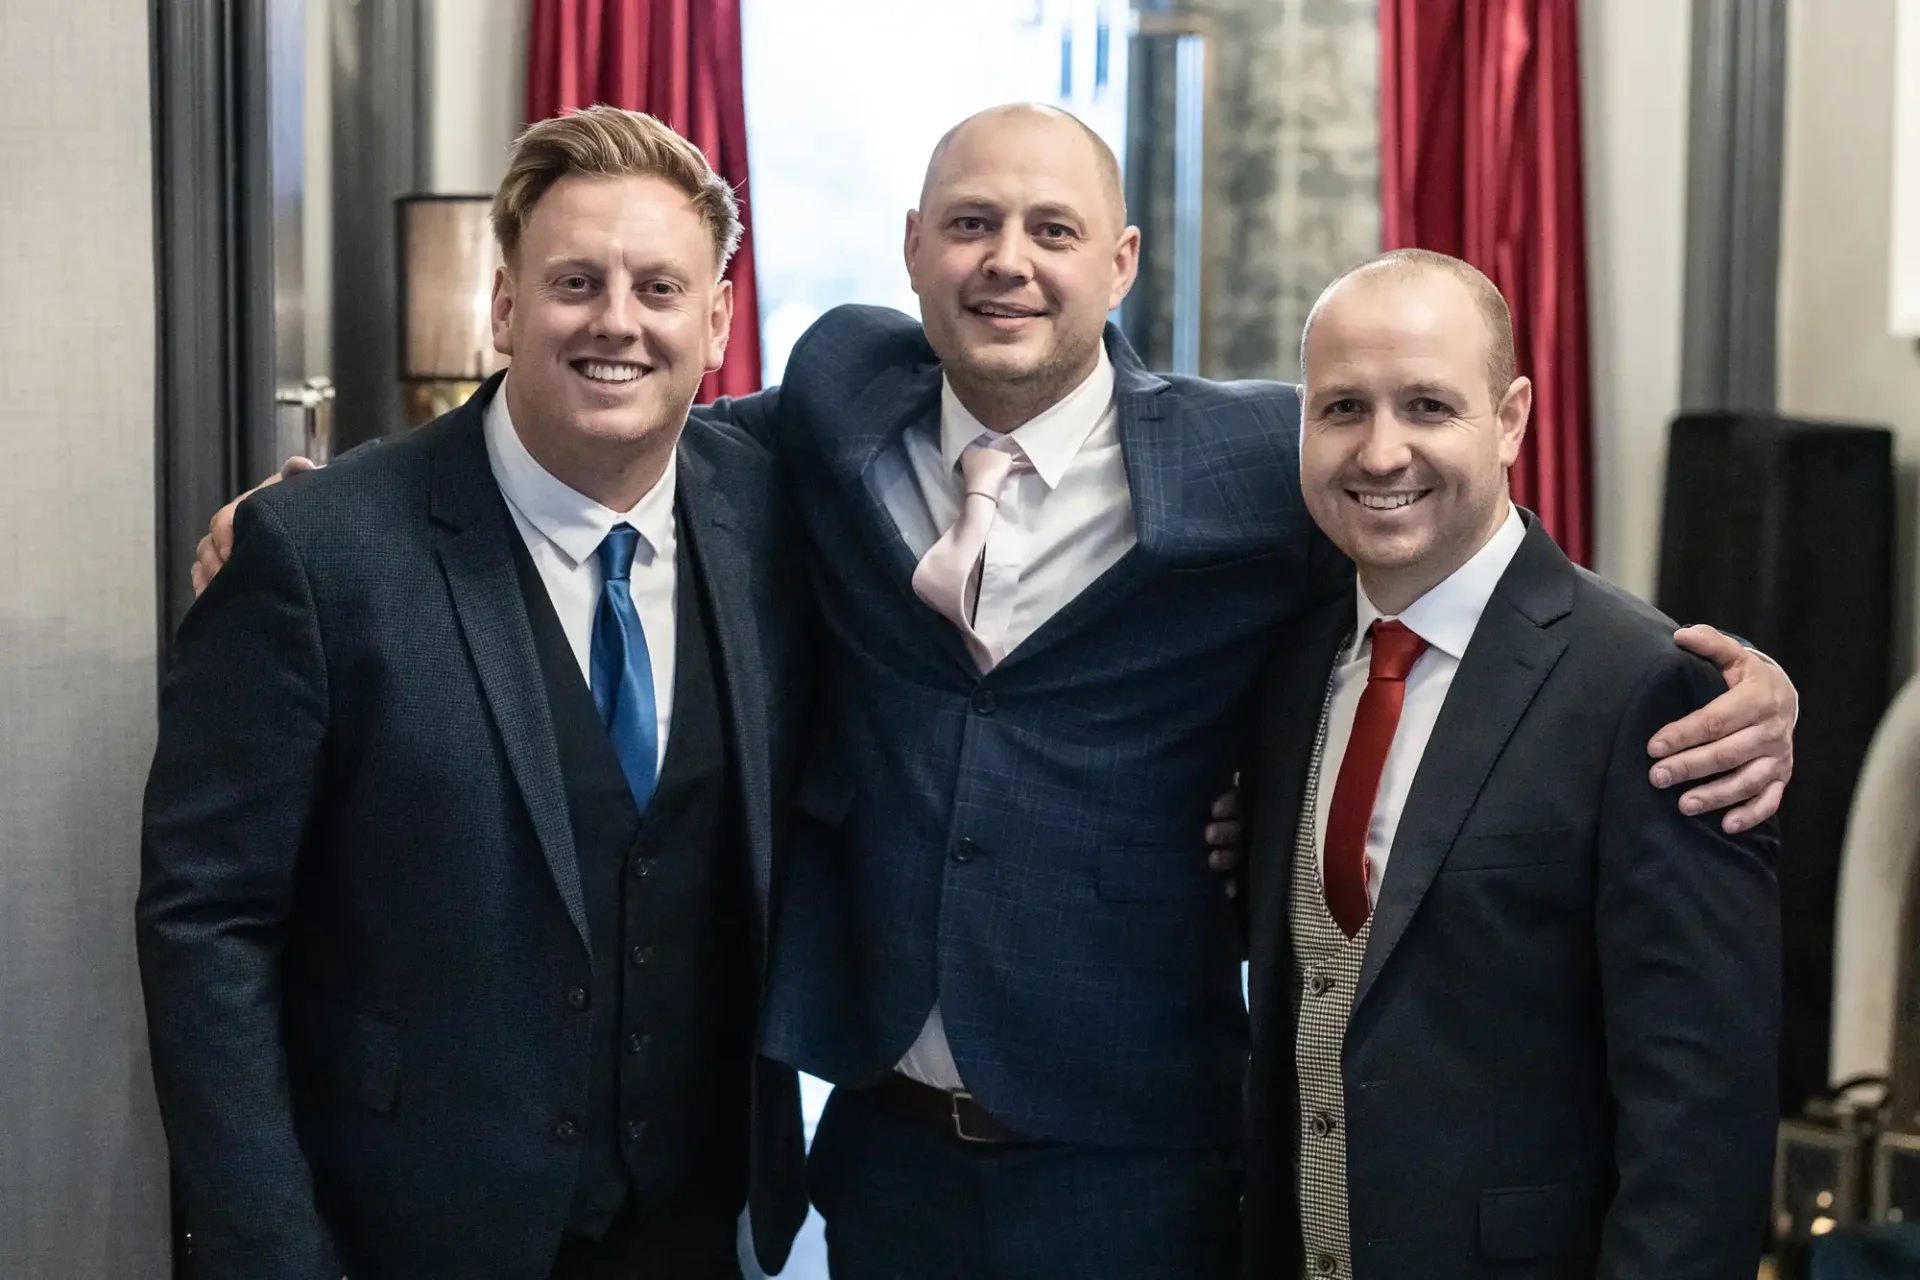 Three smiling men in business suits standing close together indoors.